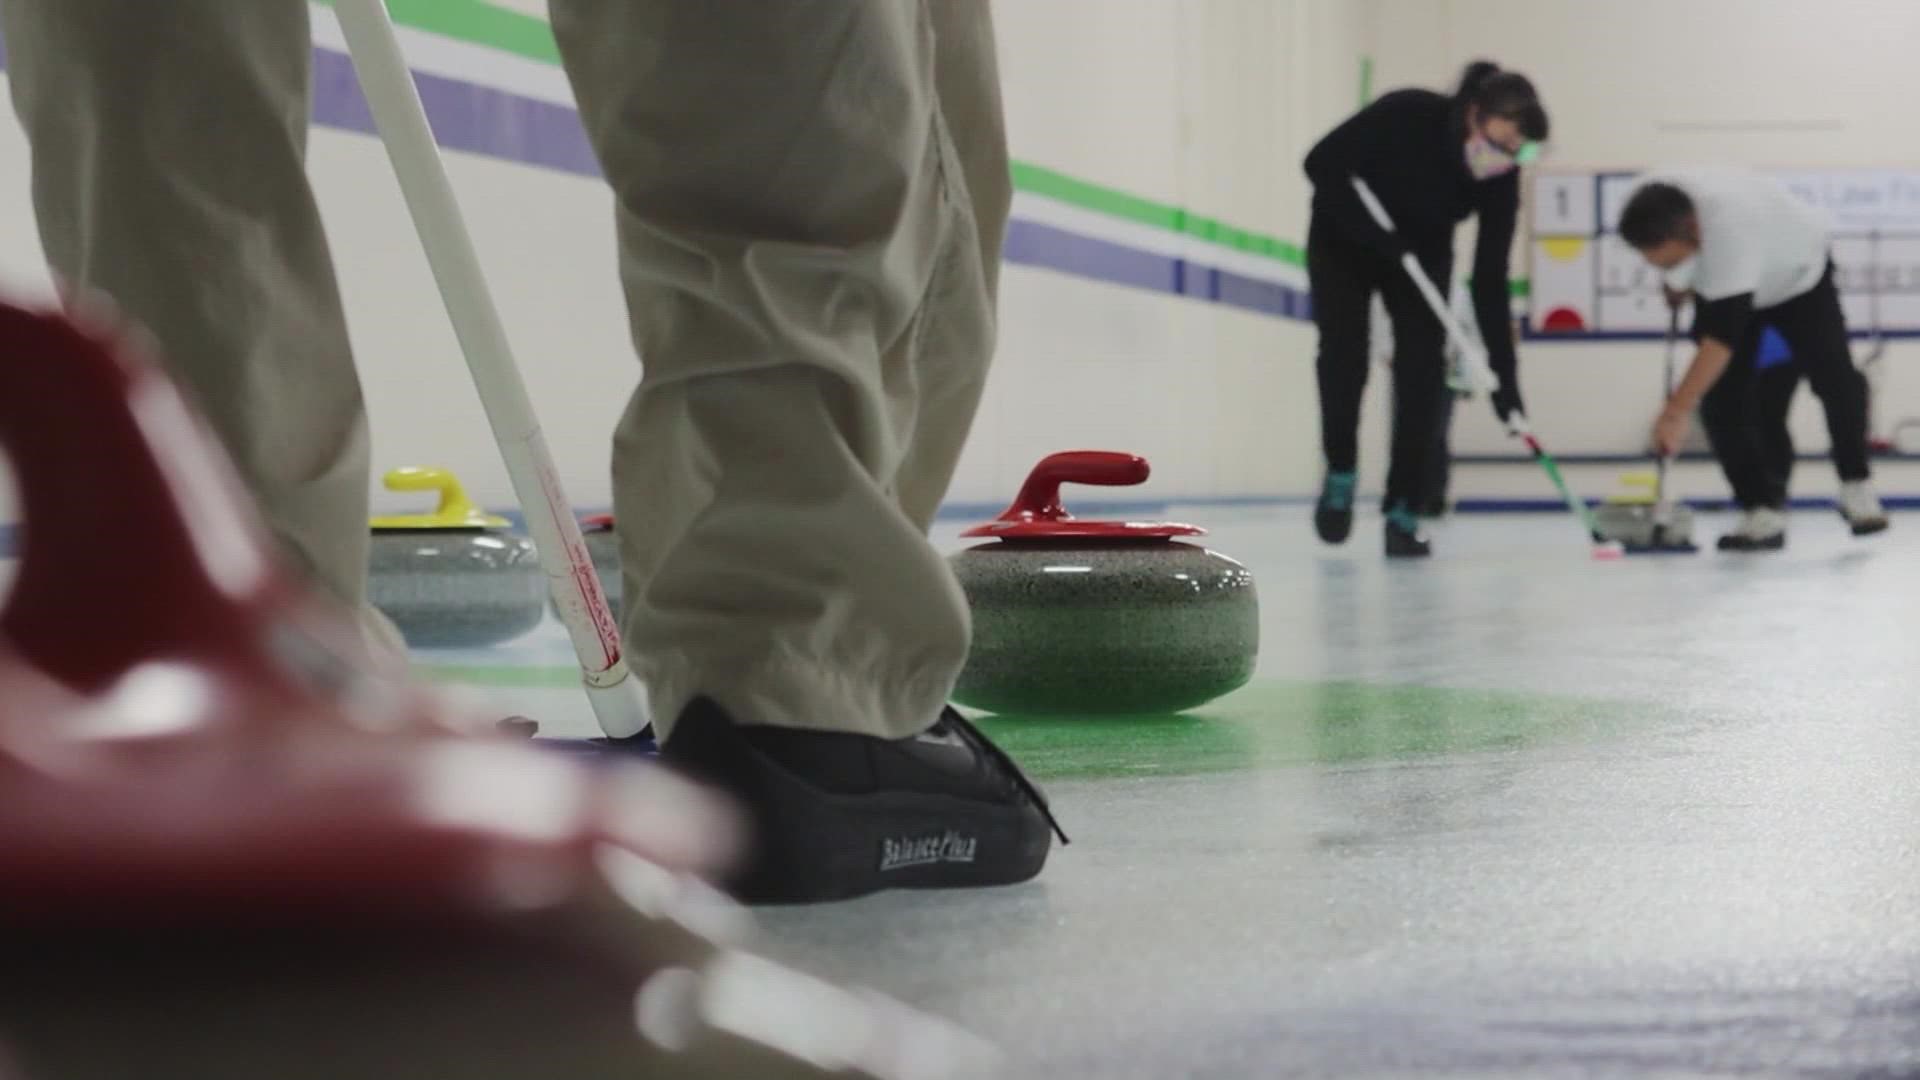 The world goes crazy for curling every four years thanks to the Winter Olympics. But at the Granite Curling Club in Seattle, curling is important 365 days a year.